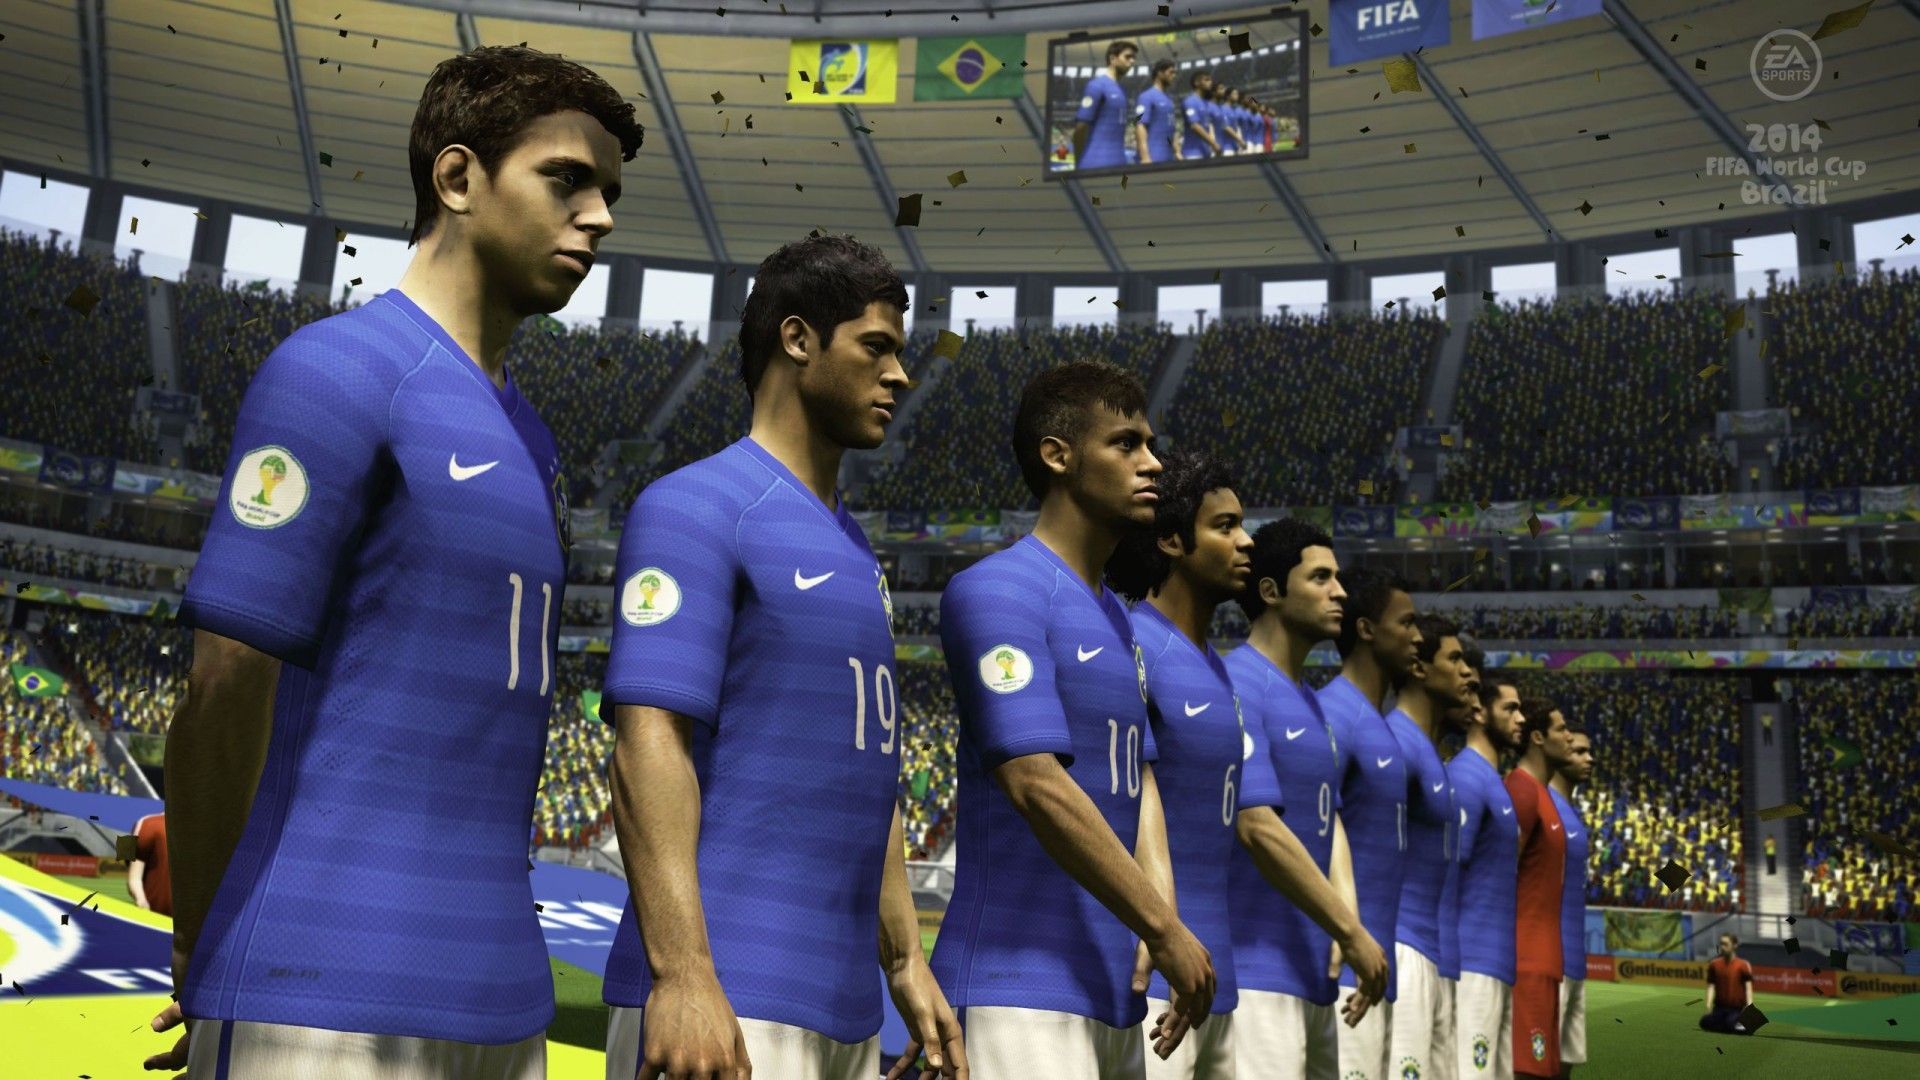 World cup 2014. 2014 FIFA World Cup Brazil. EA Sports 2014 FIFA World Cup Brazil. FIFA 14 World Cup Brazil. FIFA World Cup 2014 PC.